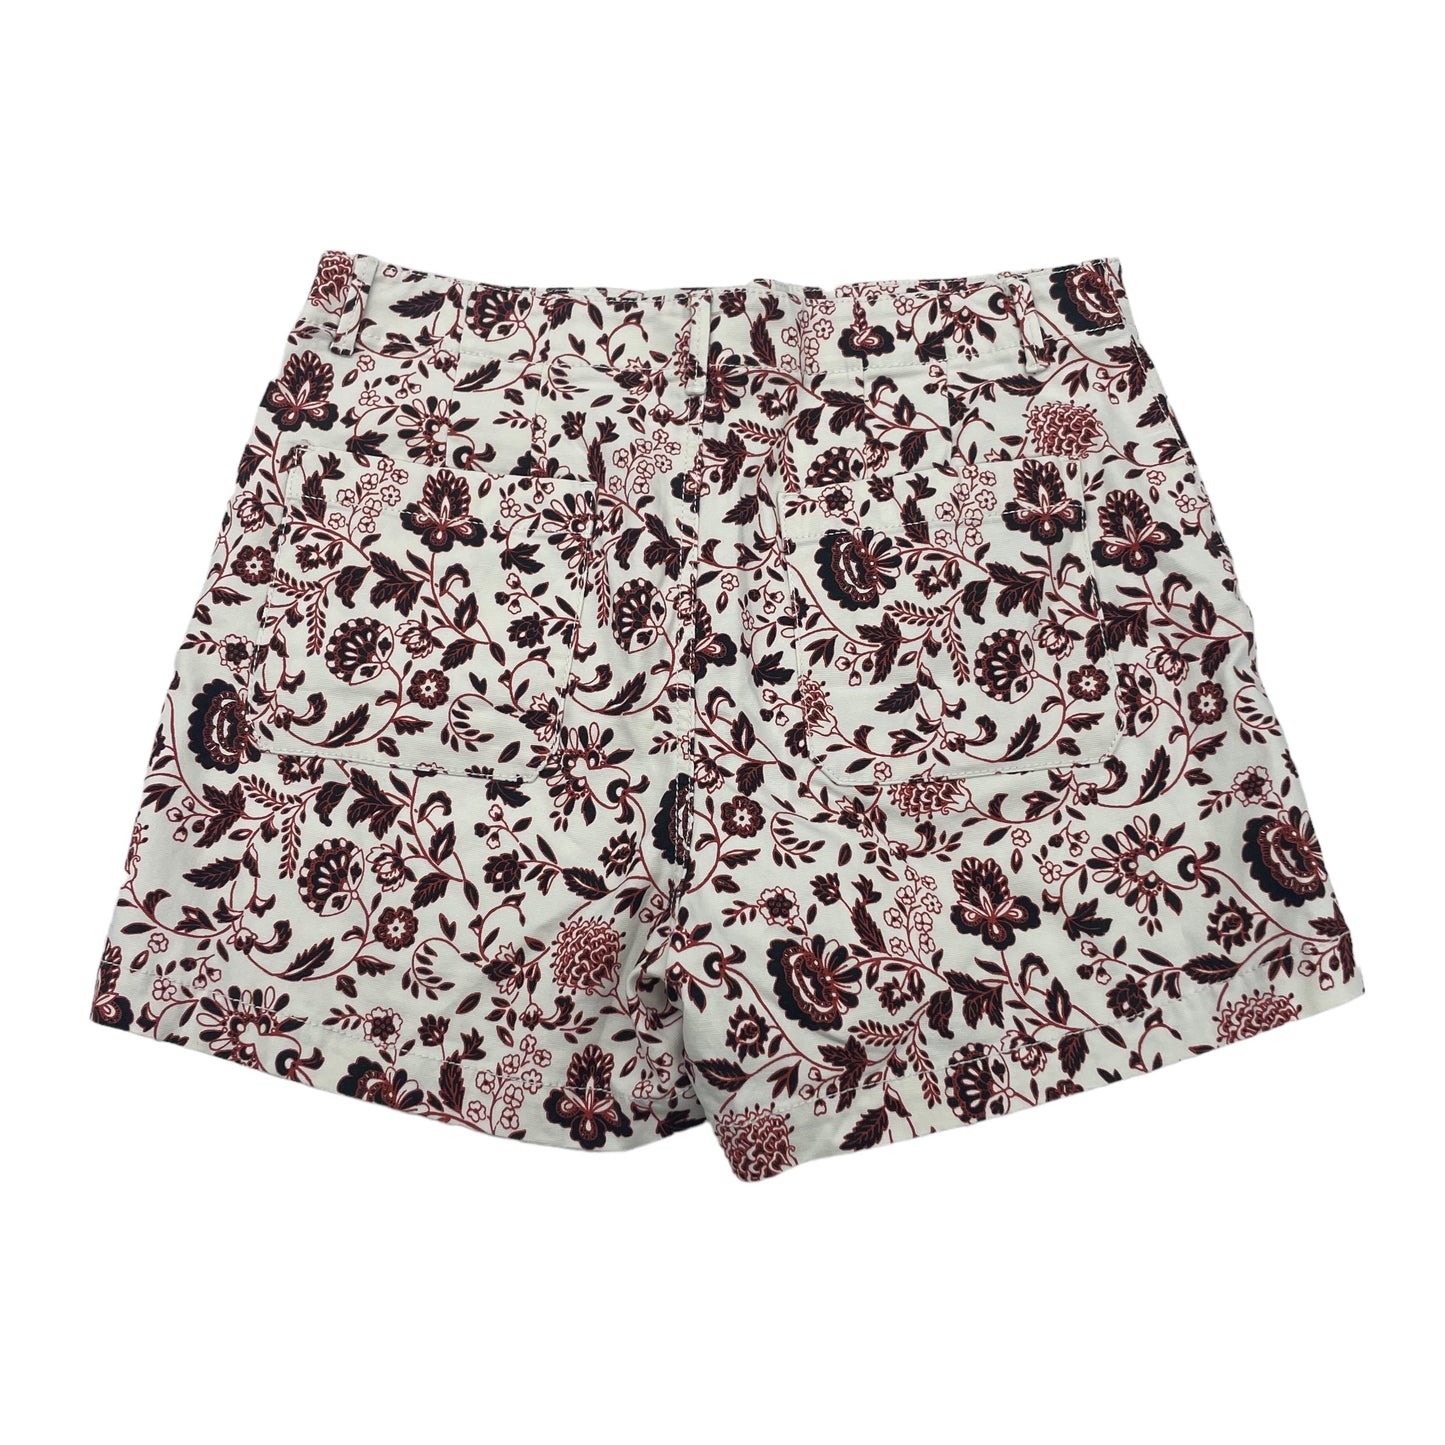 RED & WHITE SHORTS by LOFT Size:6